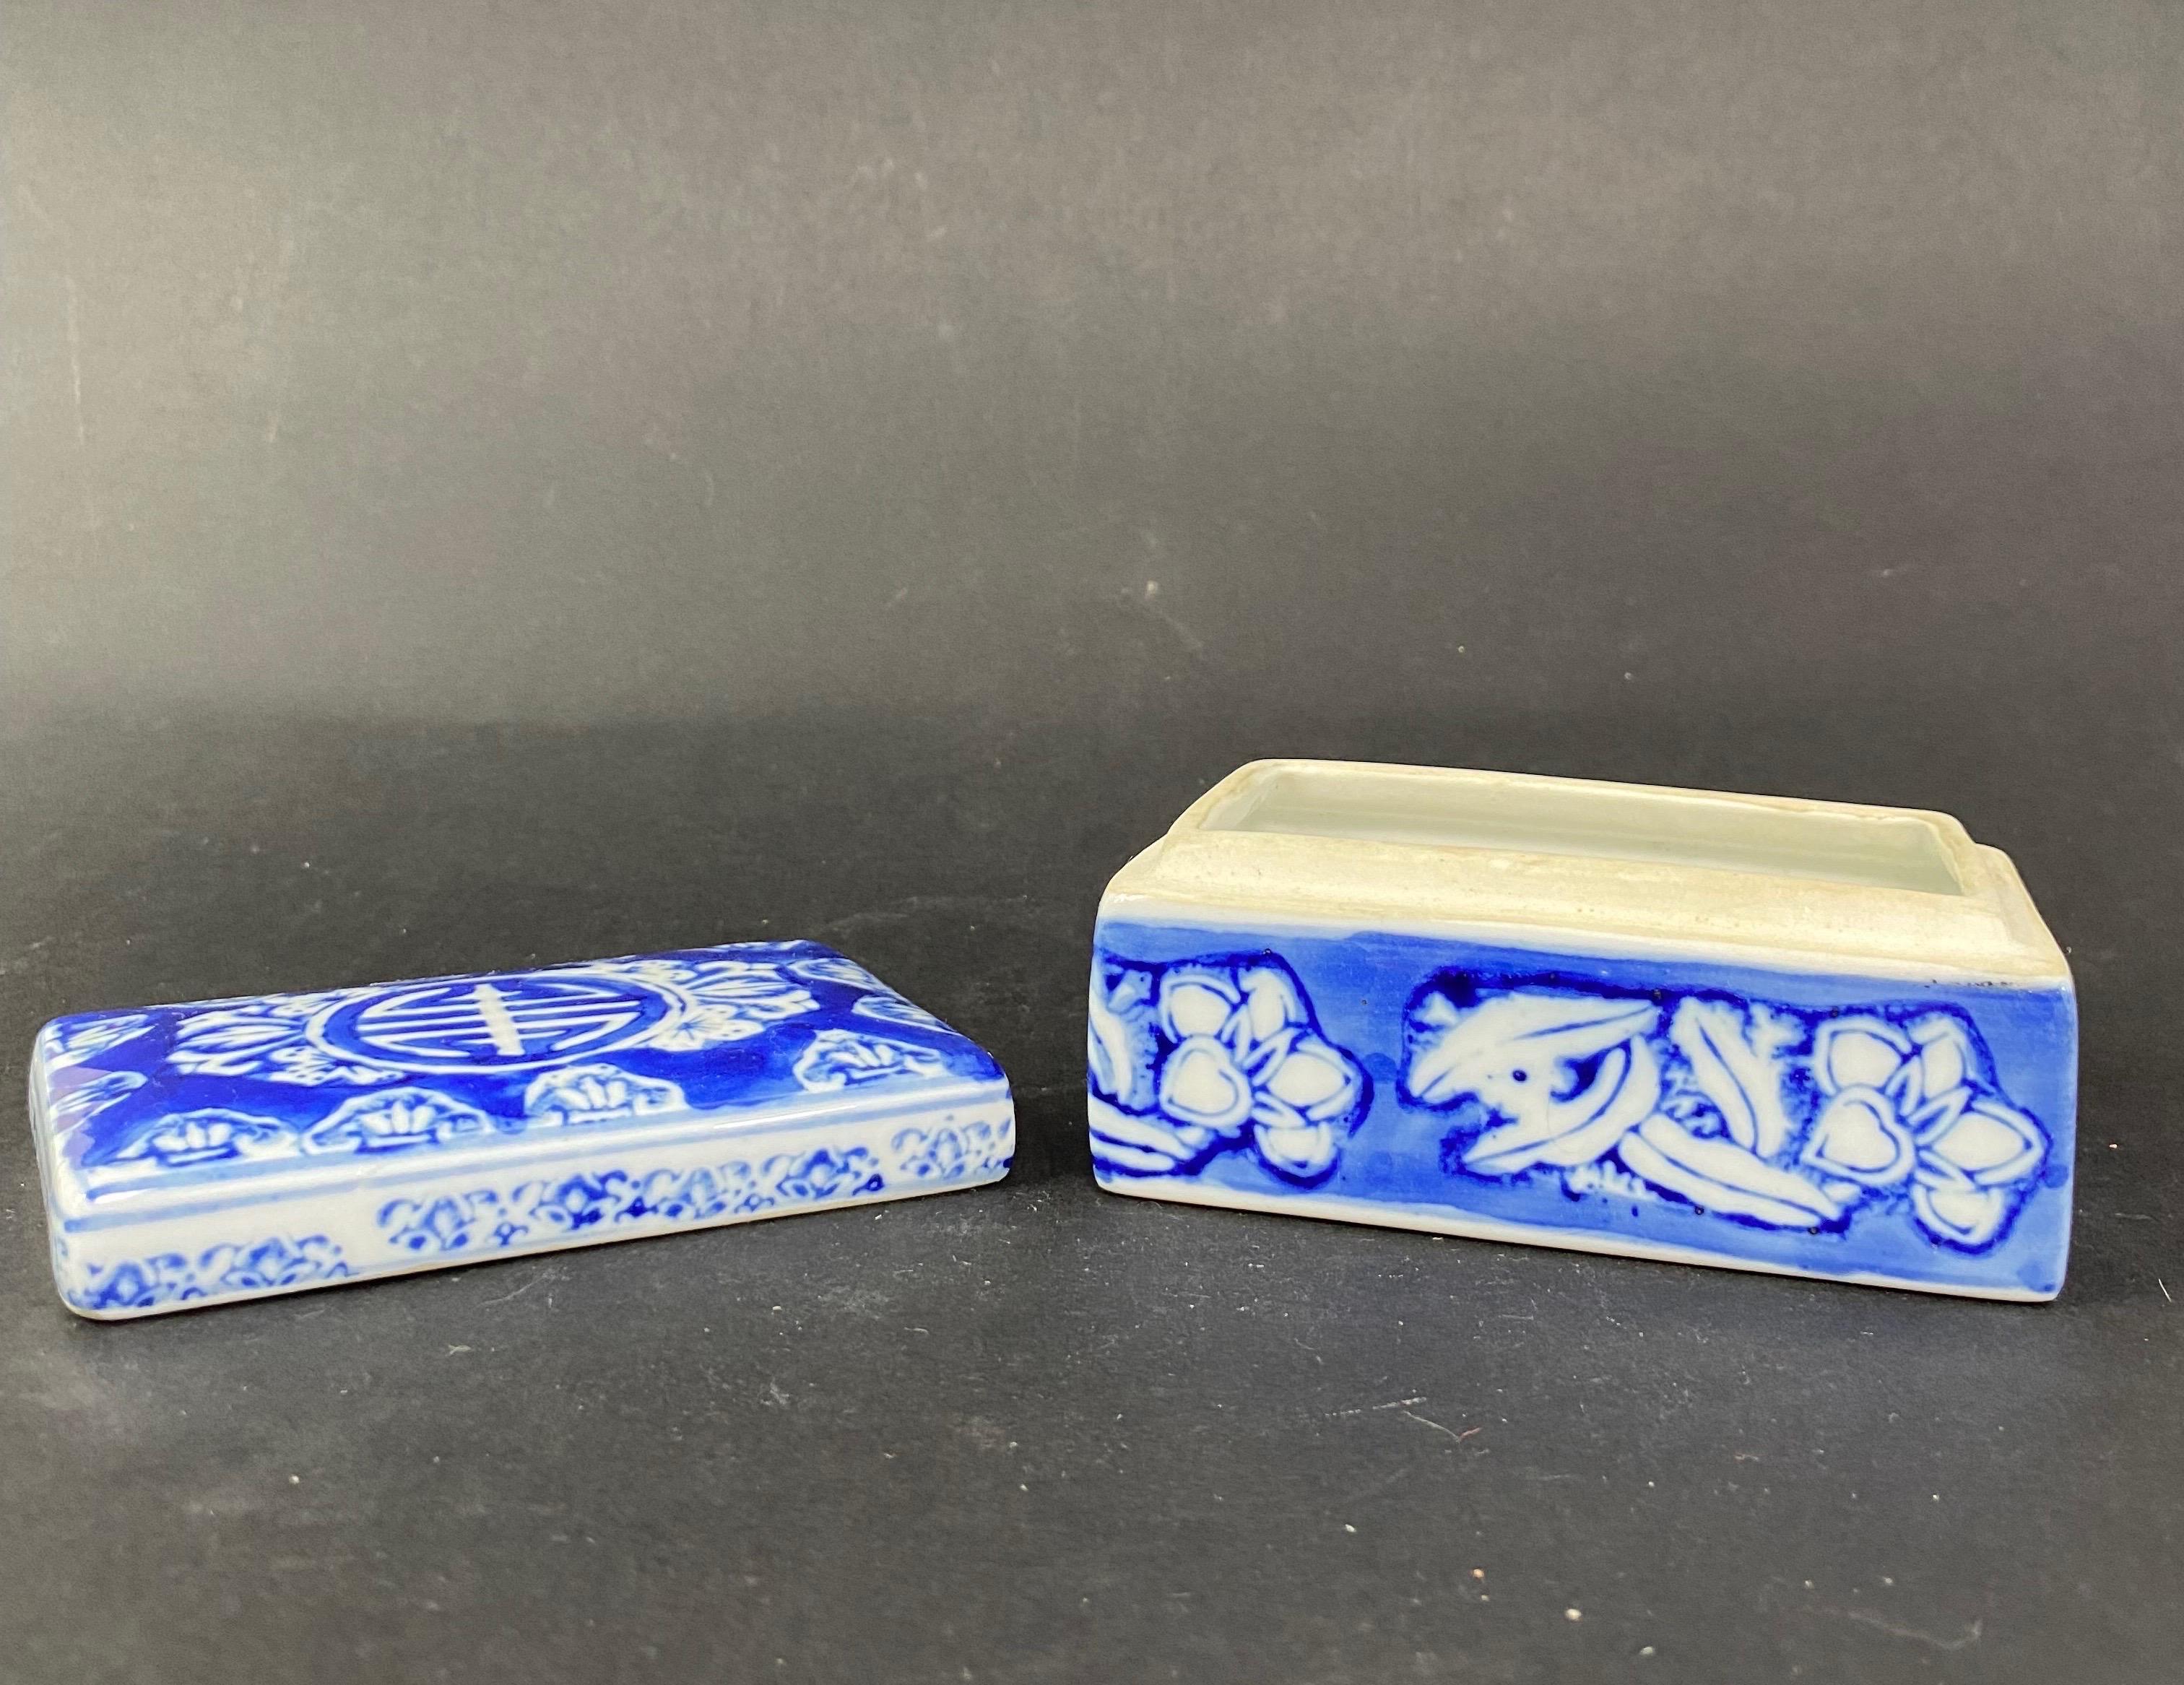 Blue and White Porcelain Ink Writing Jewerly Box - China 1900 Asian art XXth For Sale 5